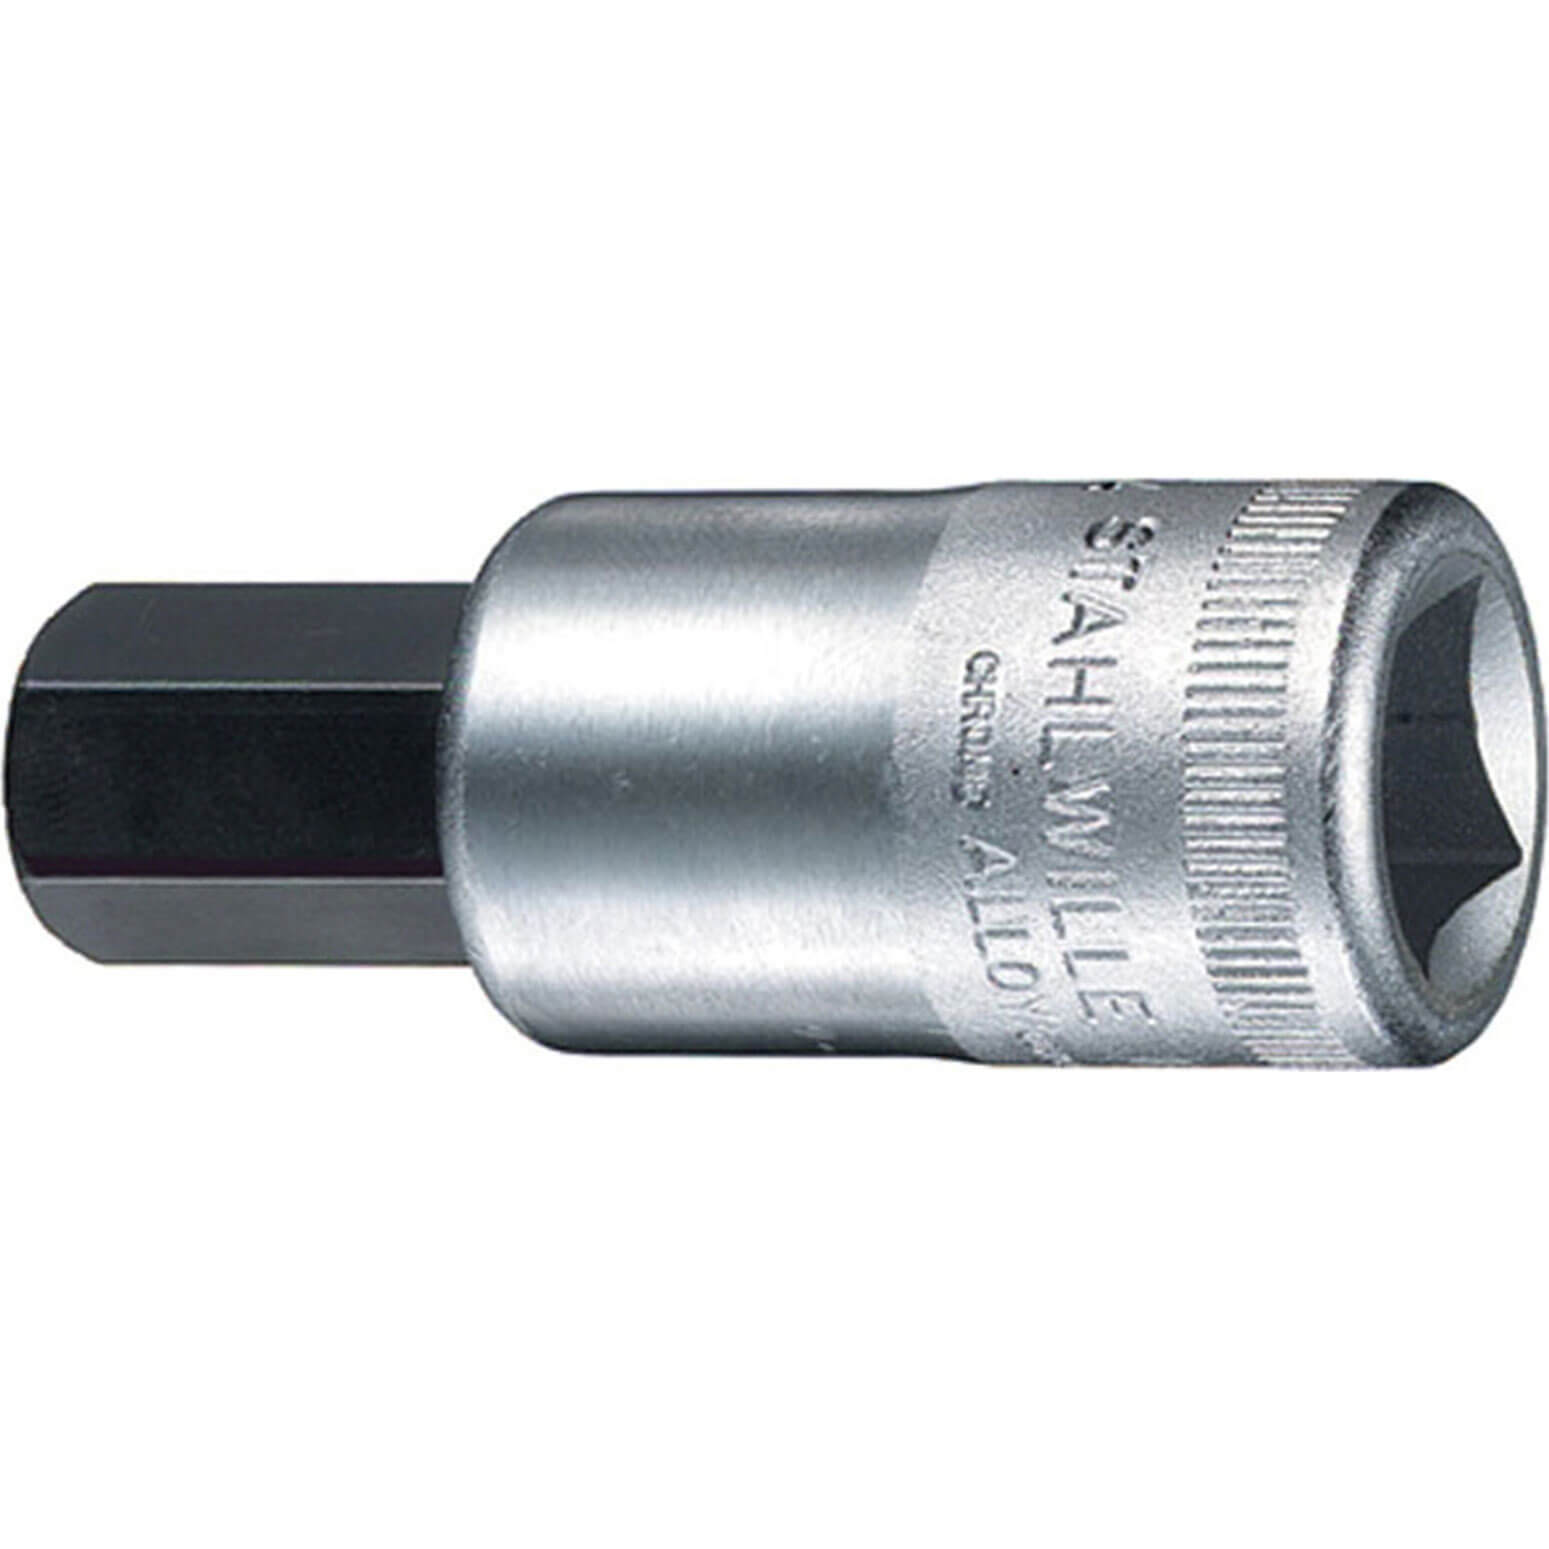 Image of Stahlwille 1/2" Drive INHEX Hexagon Socket Bit Imperial 1/2" 1/4"